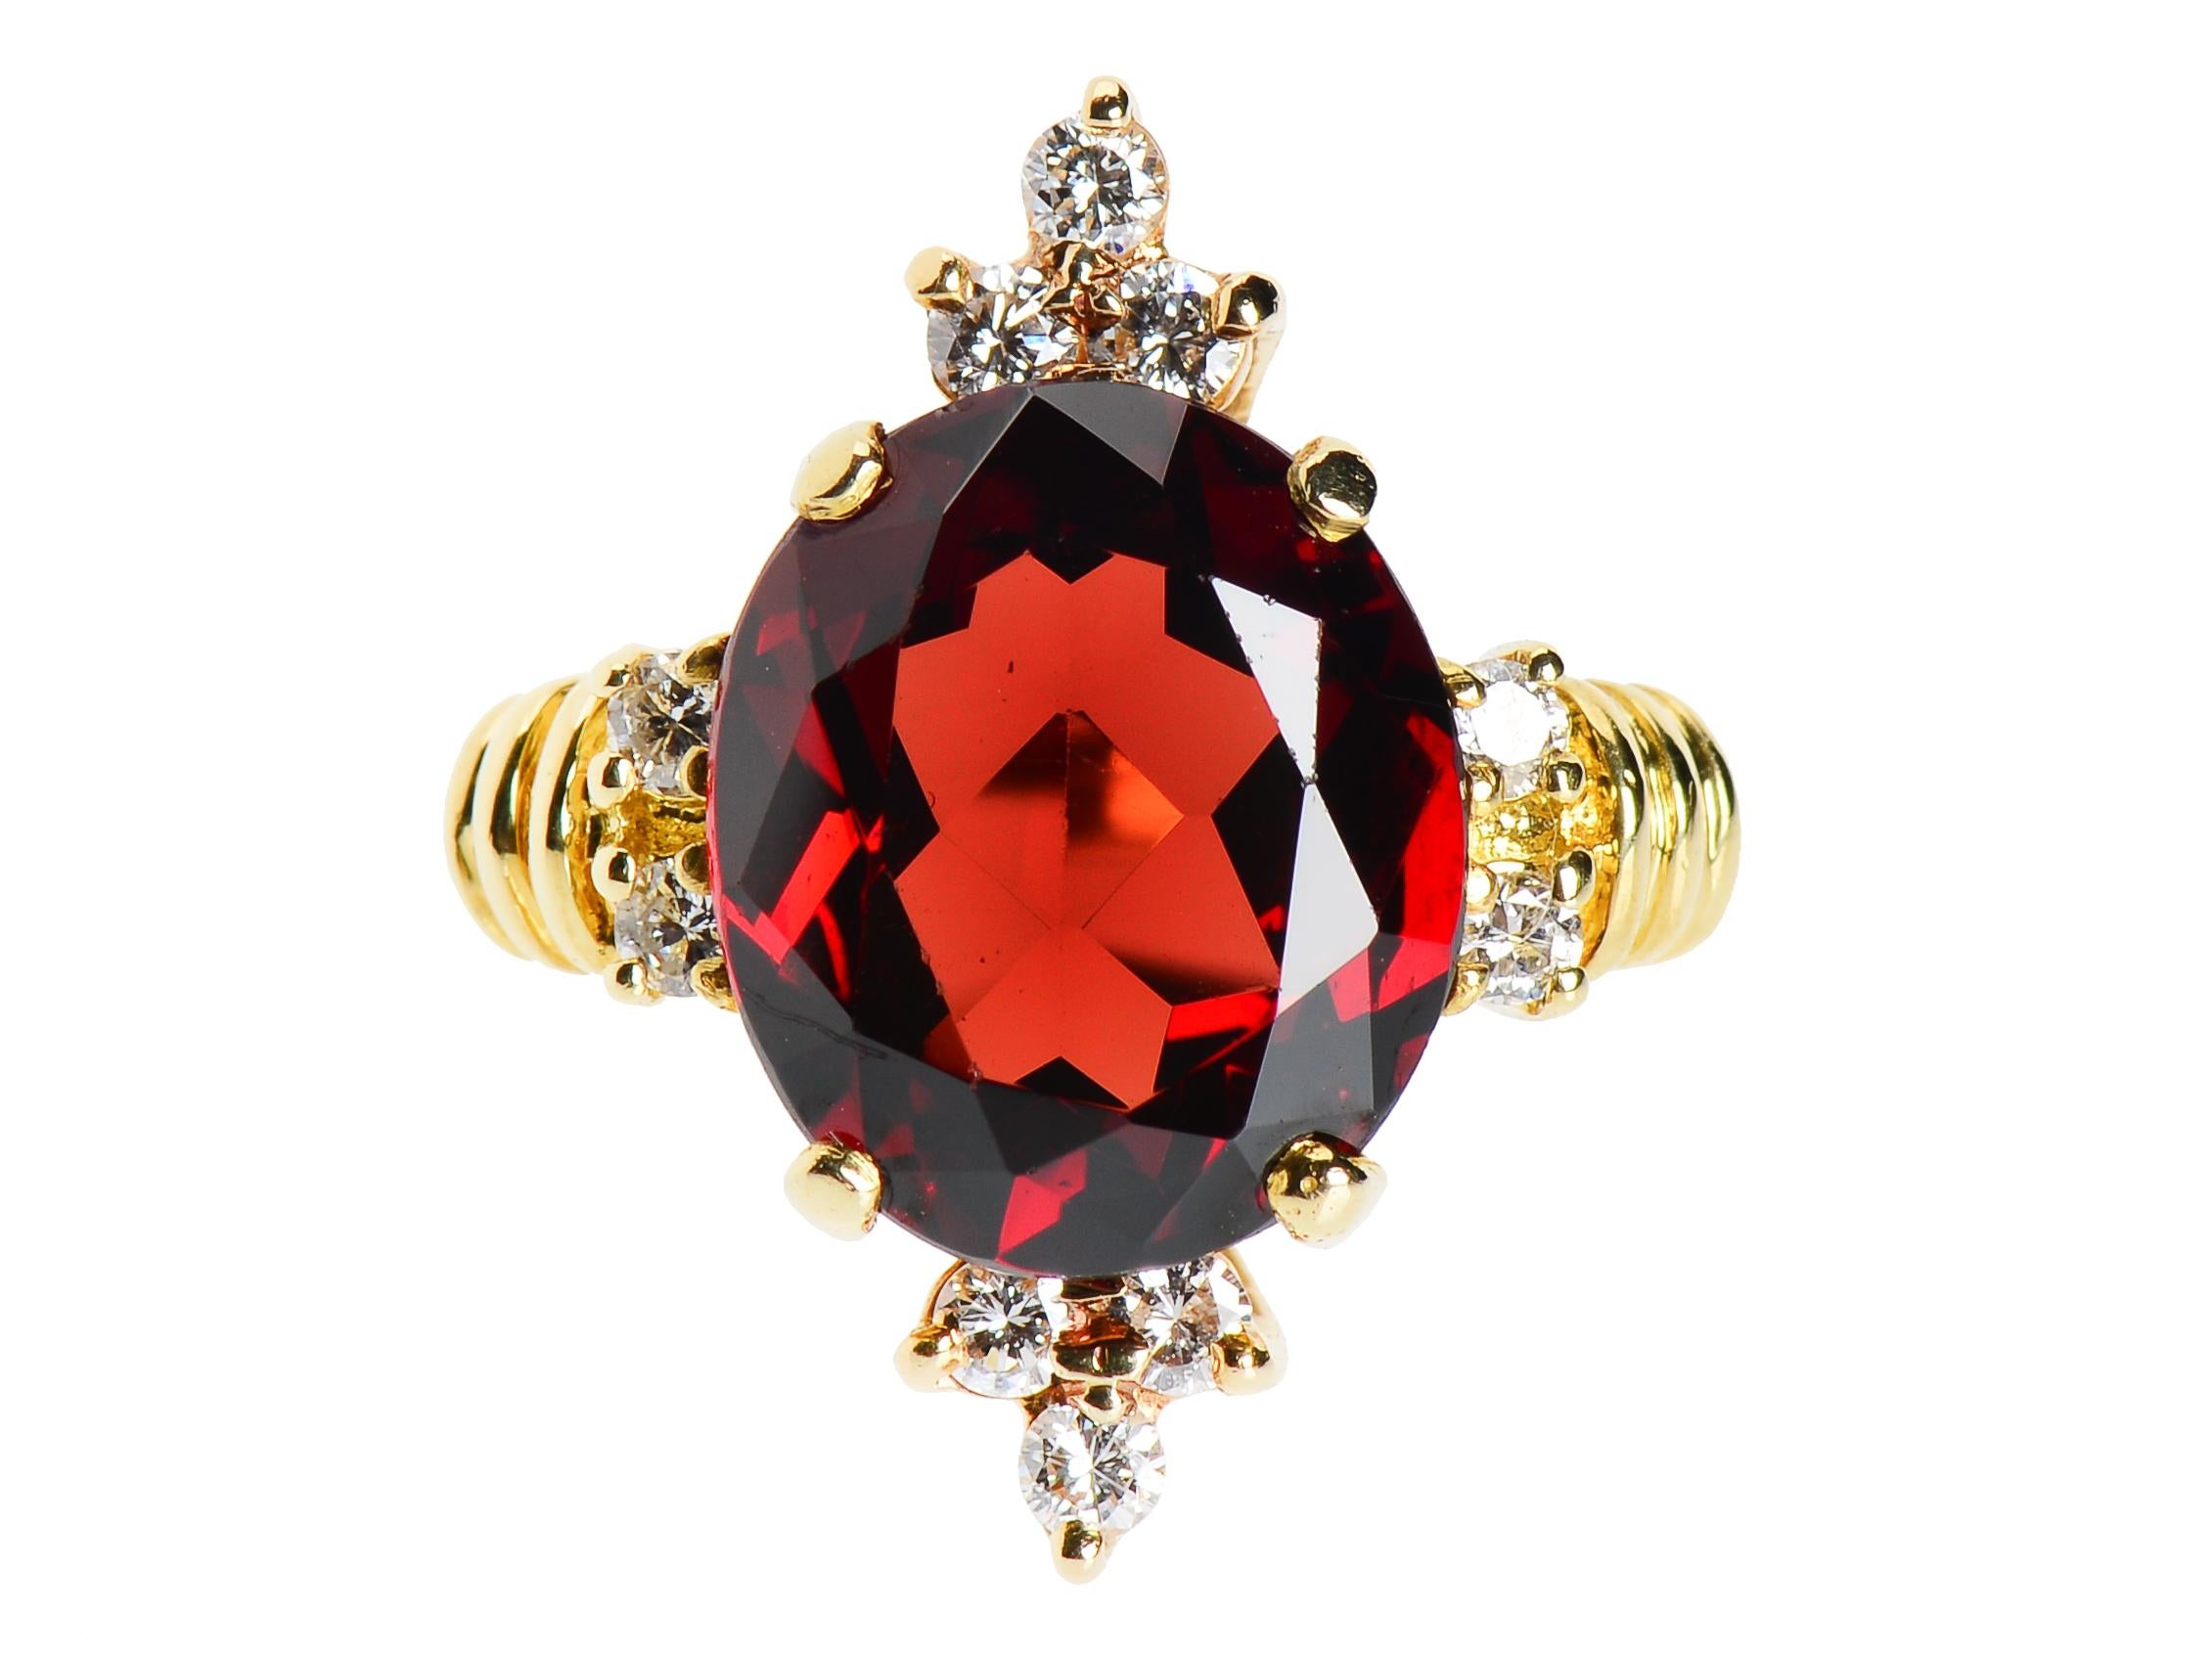 The port color of the Lucious garnet has fiery highlights and will call to you with its beauty. The garnet is 4.75 and though little of the 18kt gold shows on the front, the color is perfect, setting off the diamond and garnet brilliance. The garnet